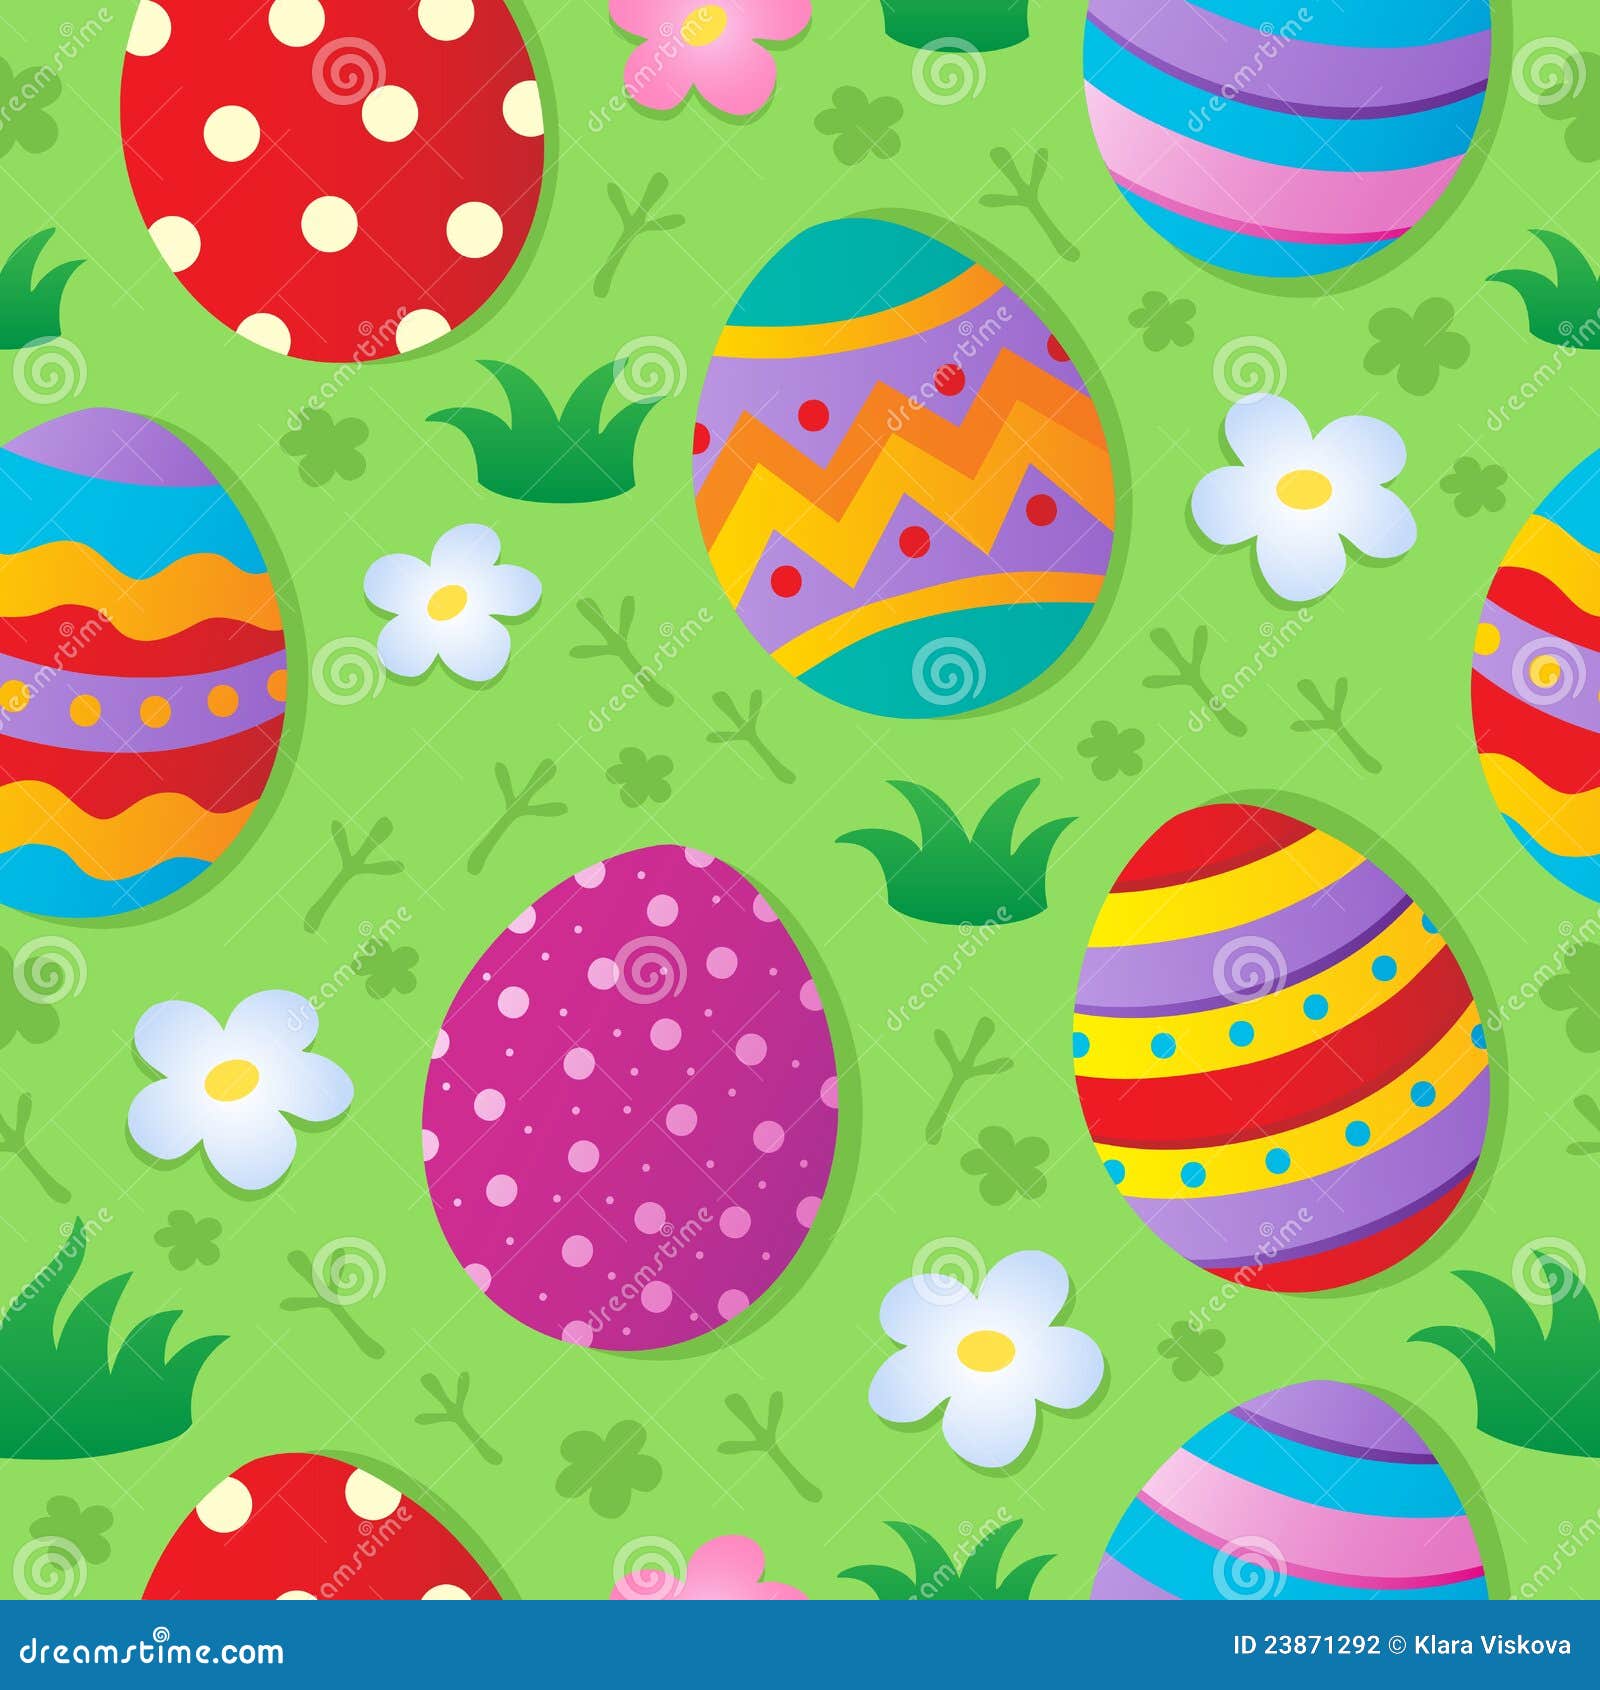 easter themed clipart - photo #41